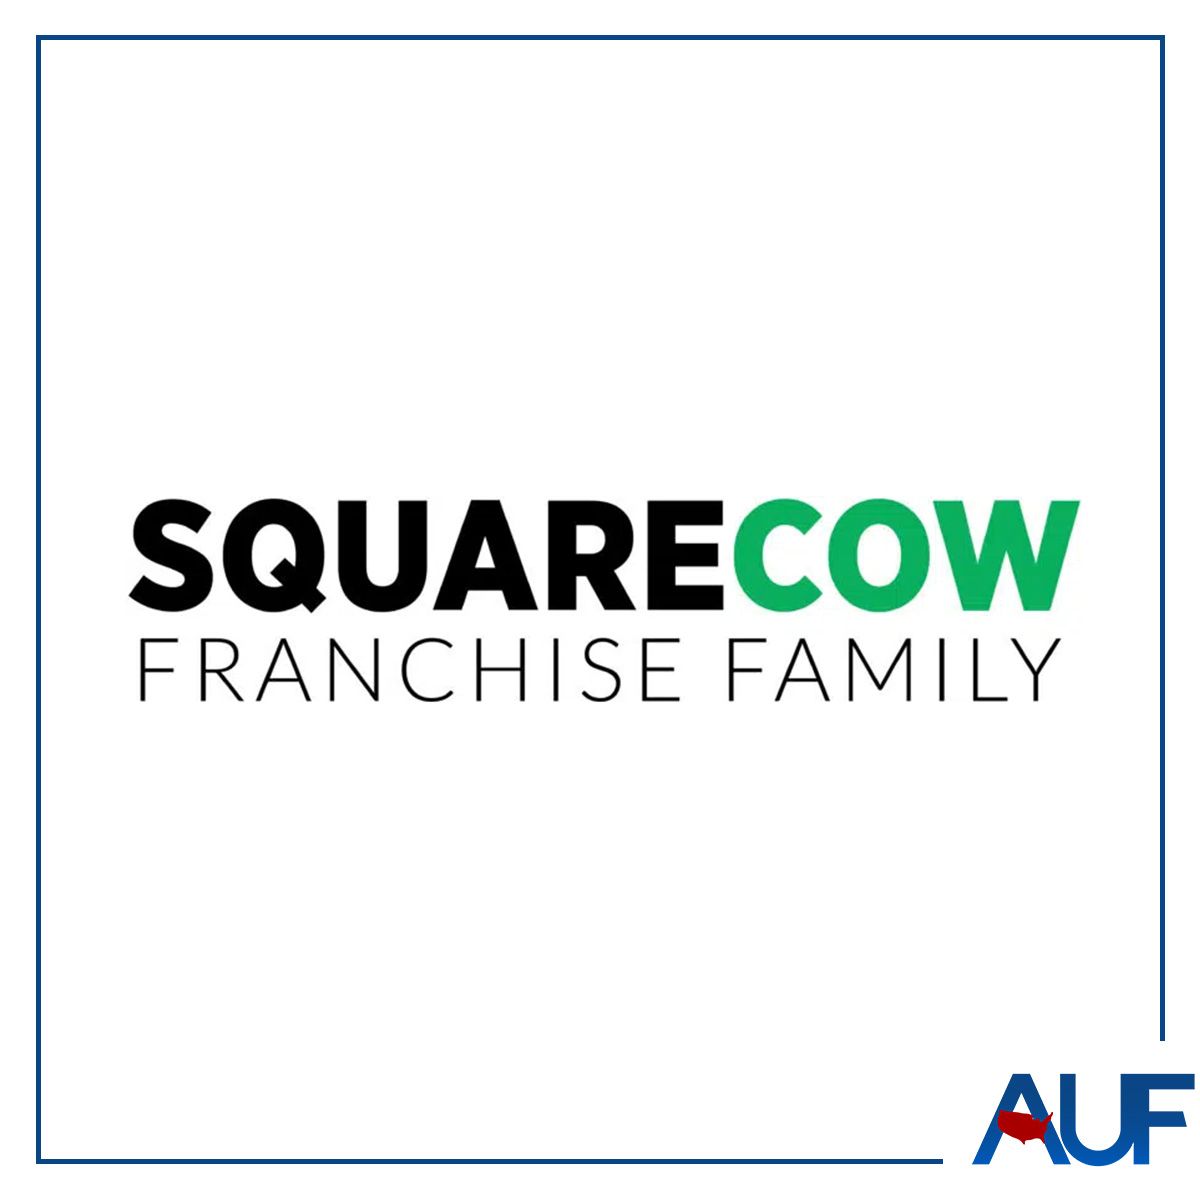 Multiple Pictures: Square Cow Franchise Family